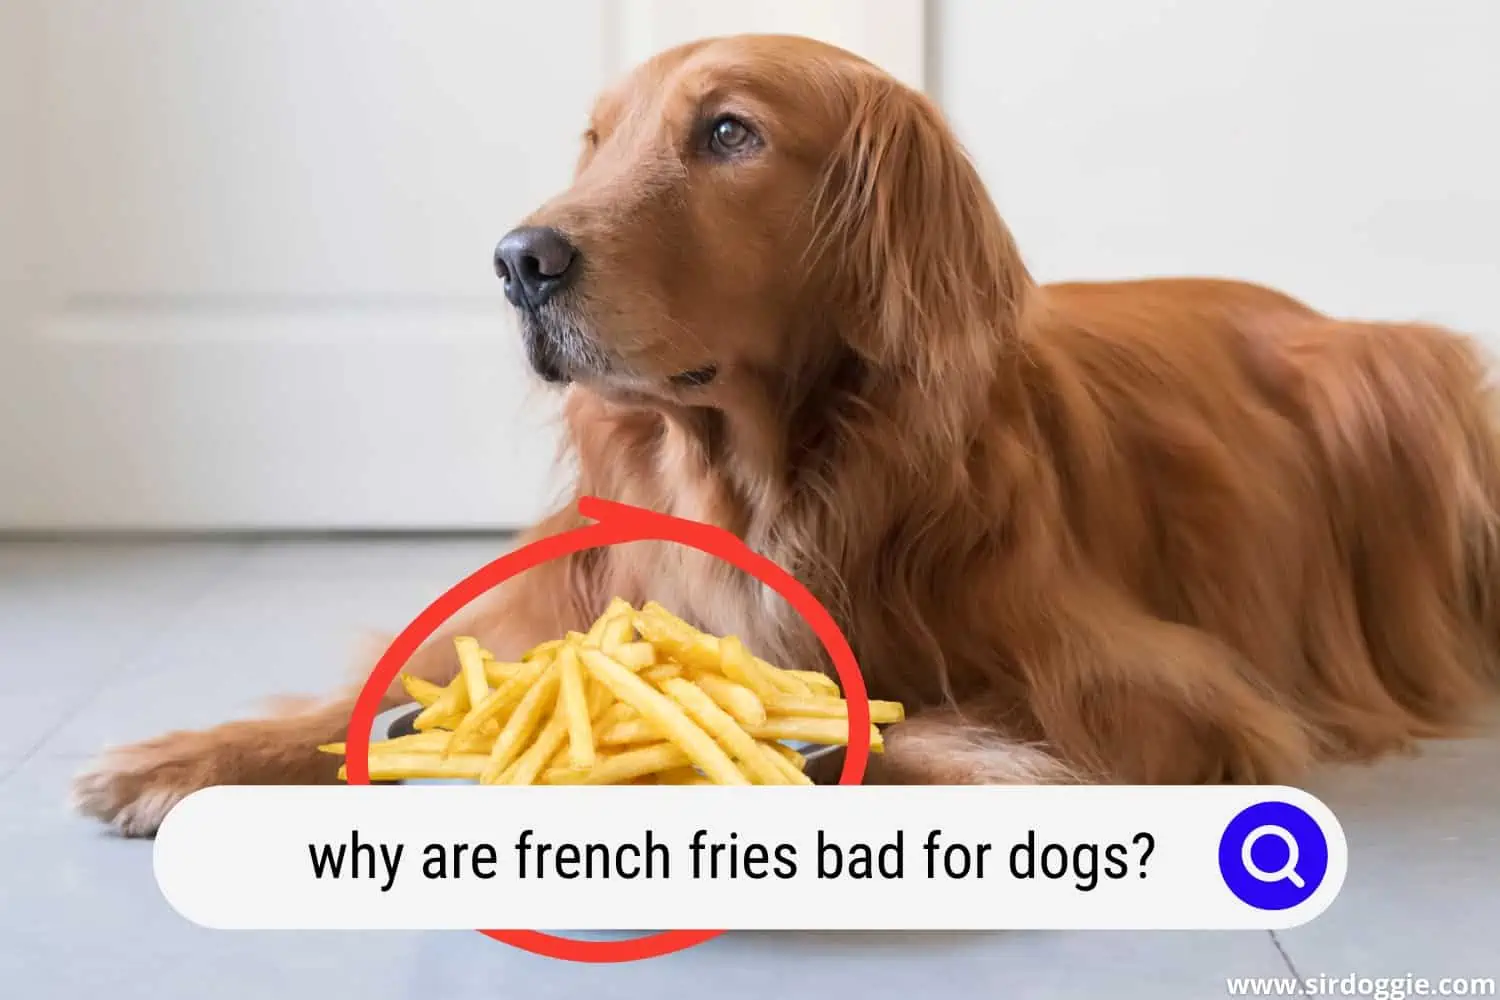 A dog showing no interest in eating fries